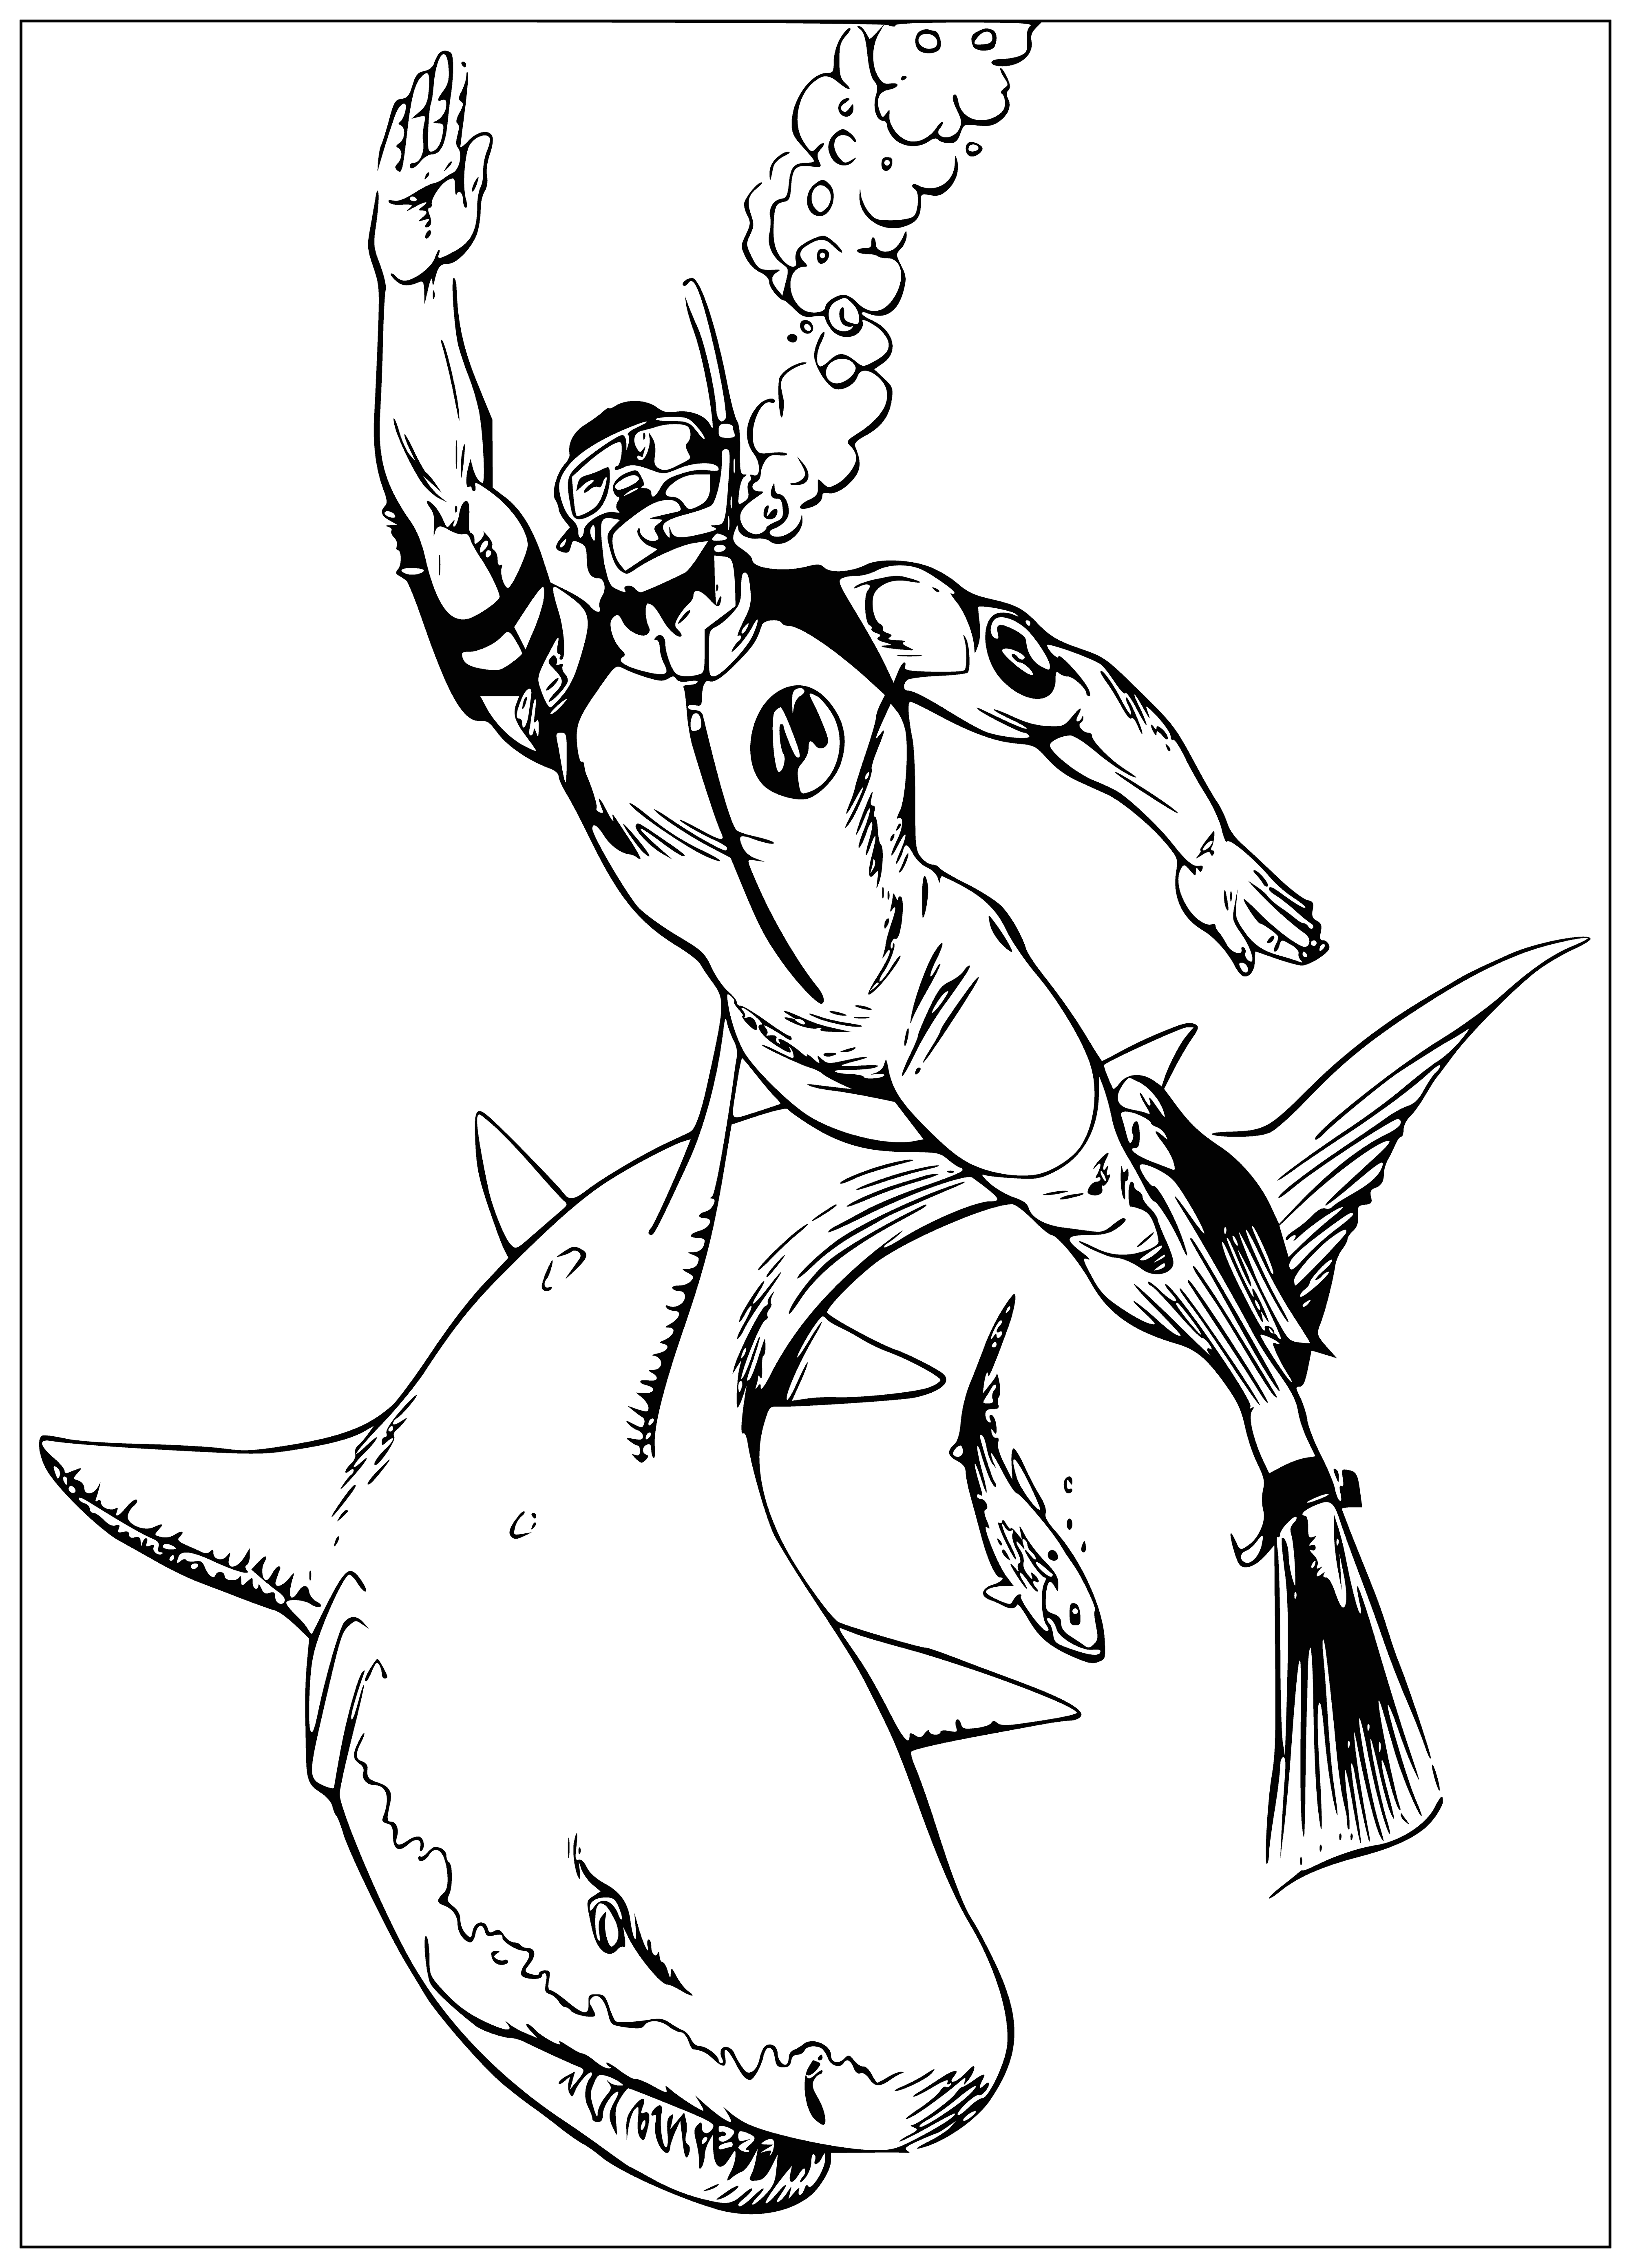 Shark and ActionMan coloring page